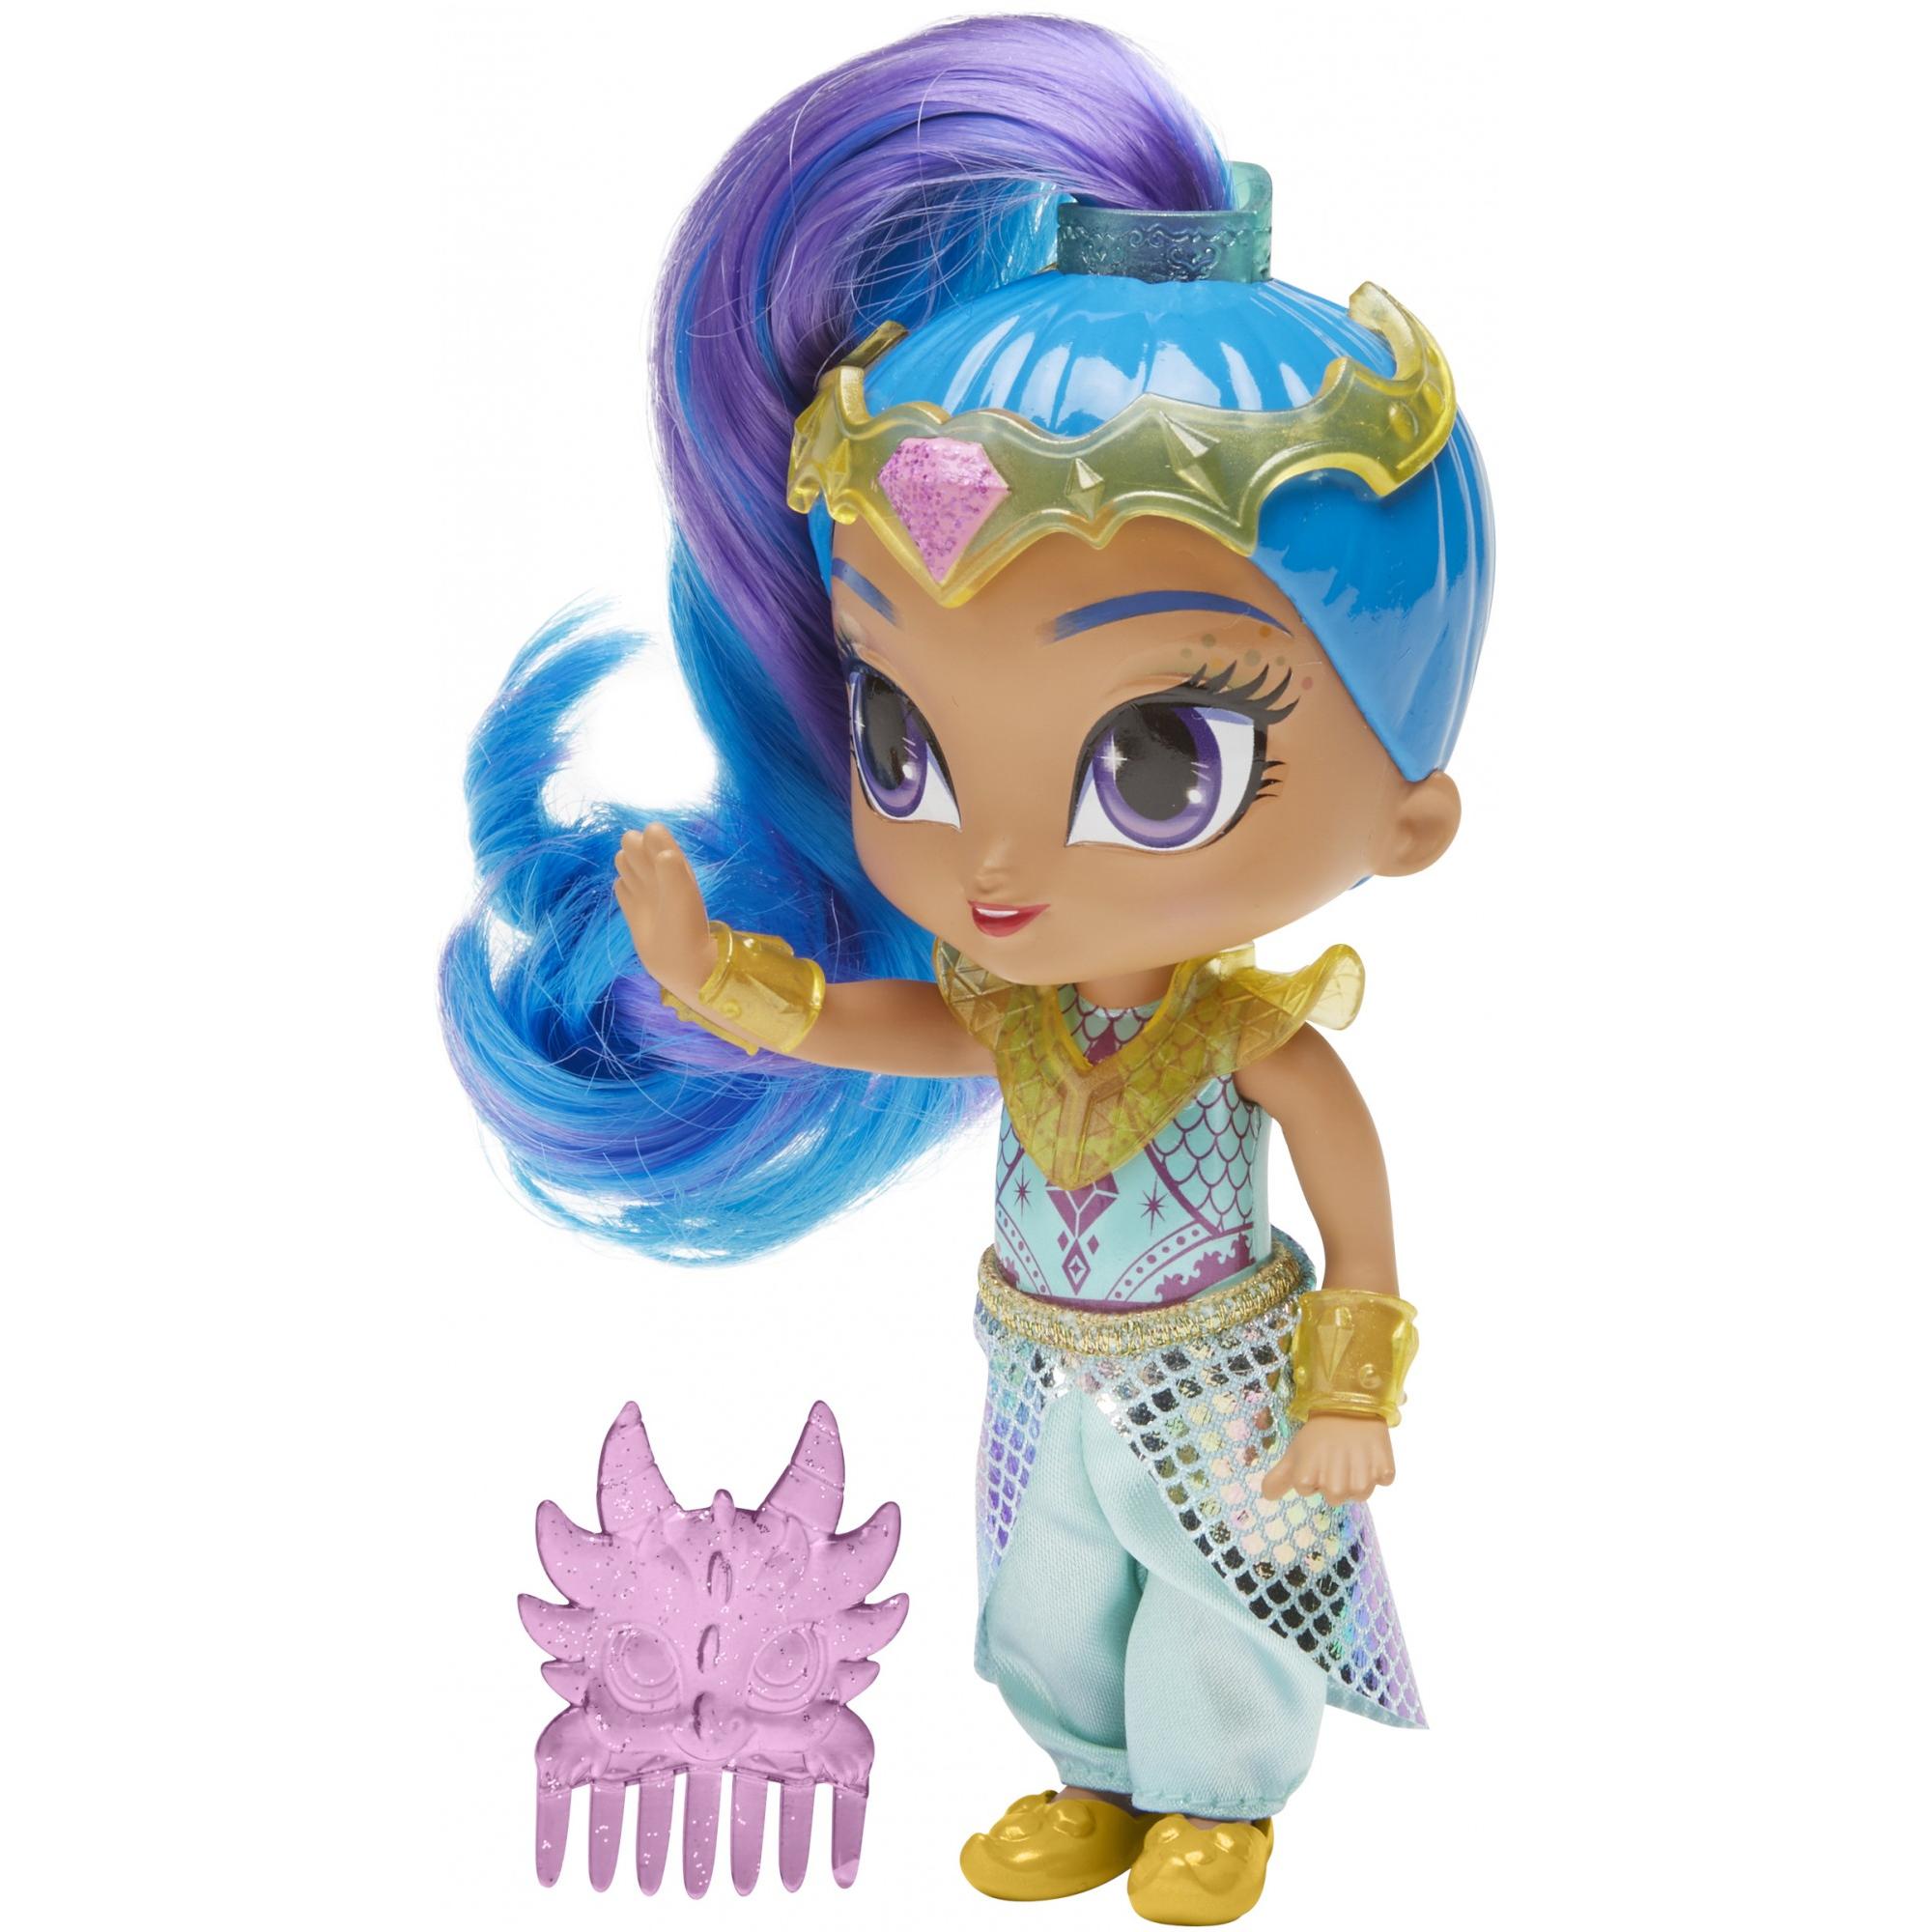 Nickelodeon Shimmer & Shine Dragon Rider Shine Doll with Accessories - image 2 of 4